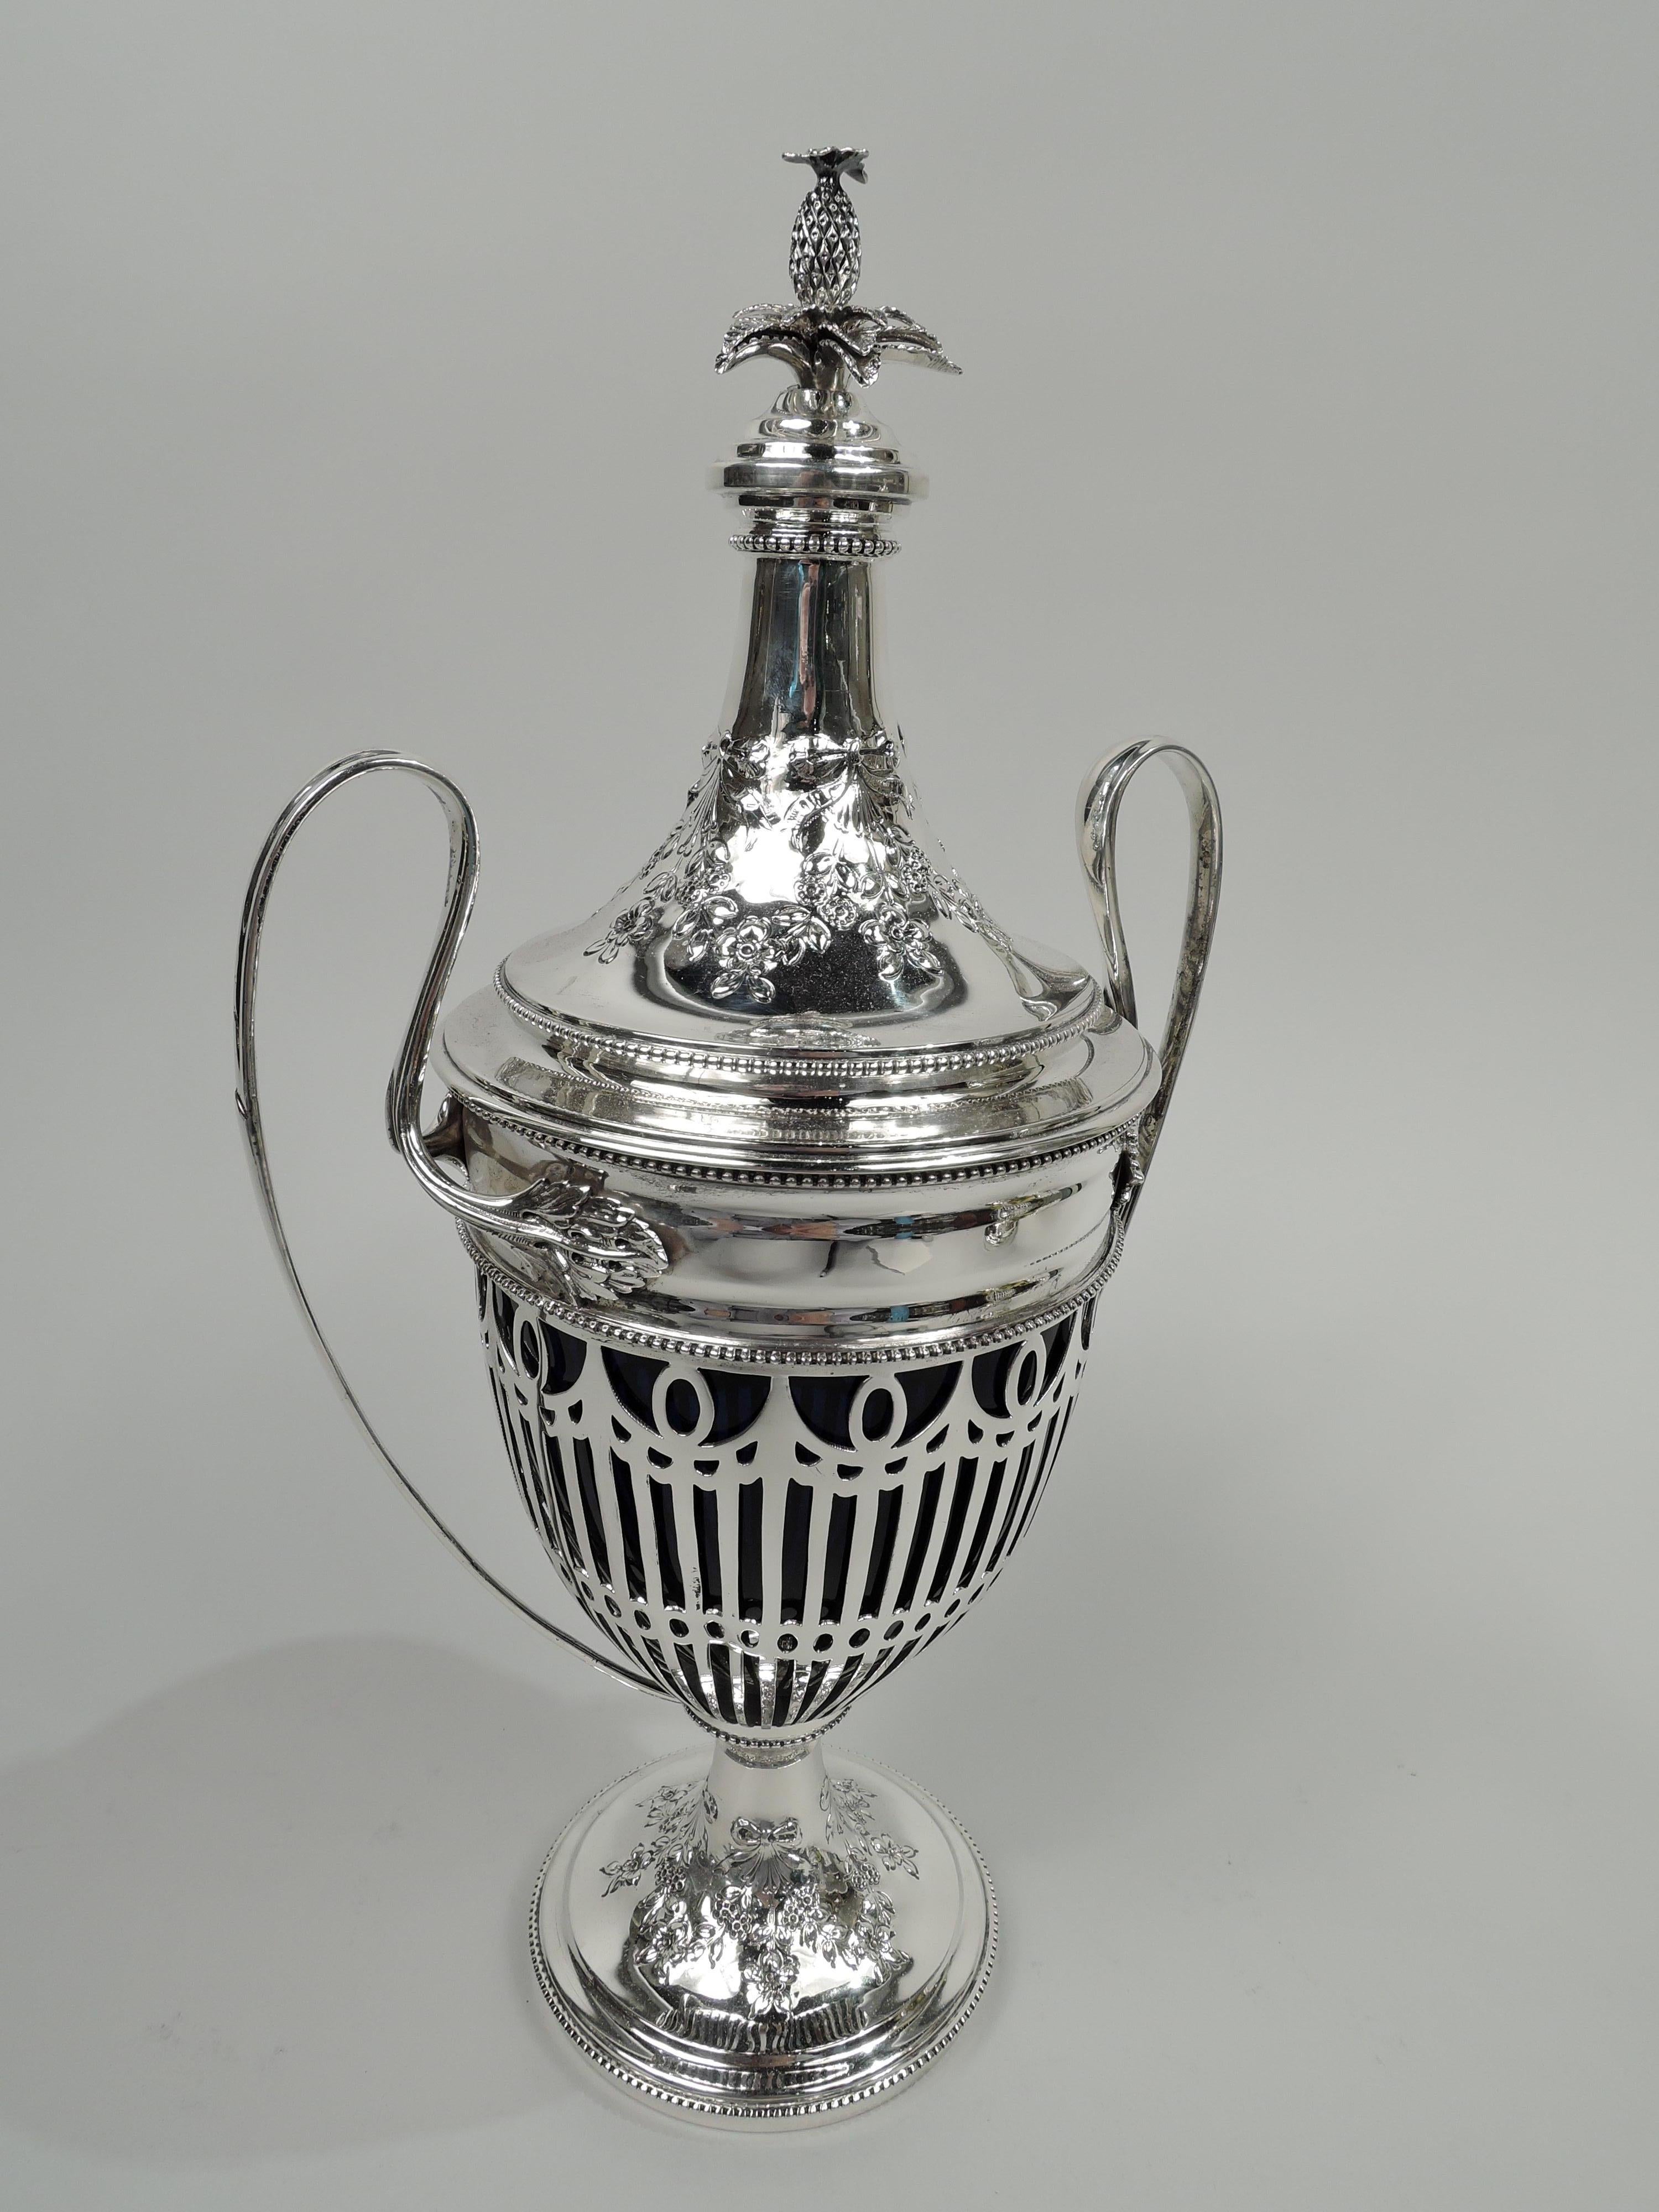 Edwardian neoclassical sterling silver covered urn. Made by Howard & Co. in New York in 1905. Ovoid bowl with high-looping leaf-mounted side handles; domed foot. Cover domed; top stepped with cast pineapple finial. Sides open with flutes and